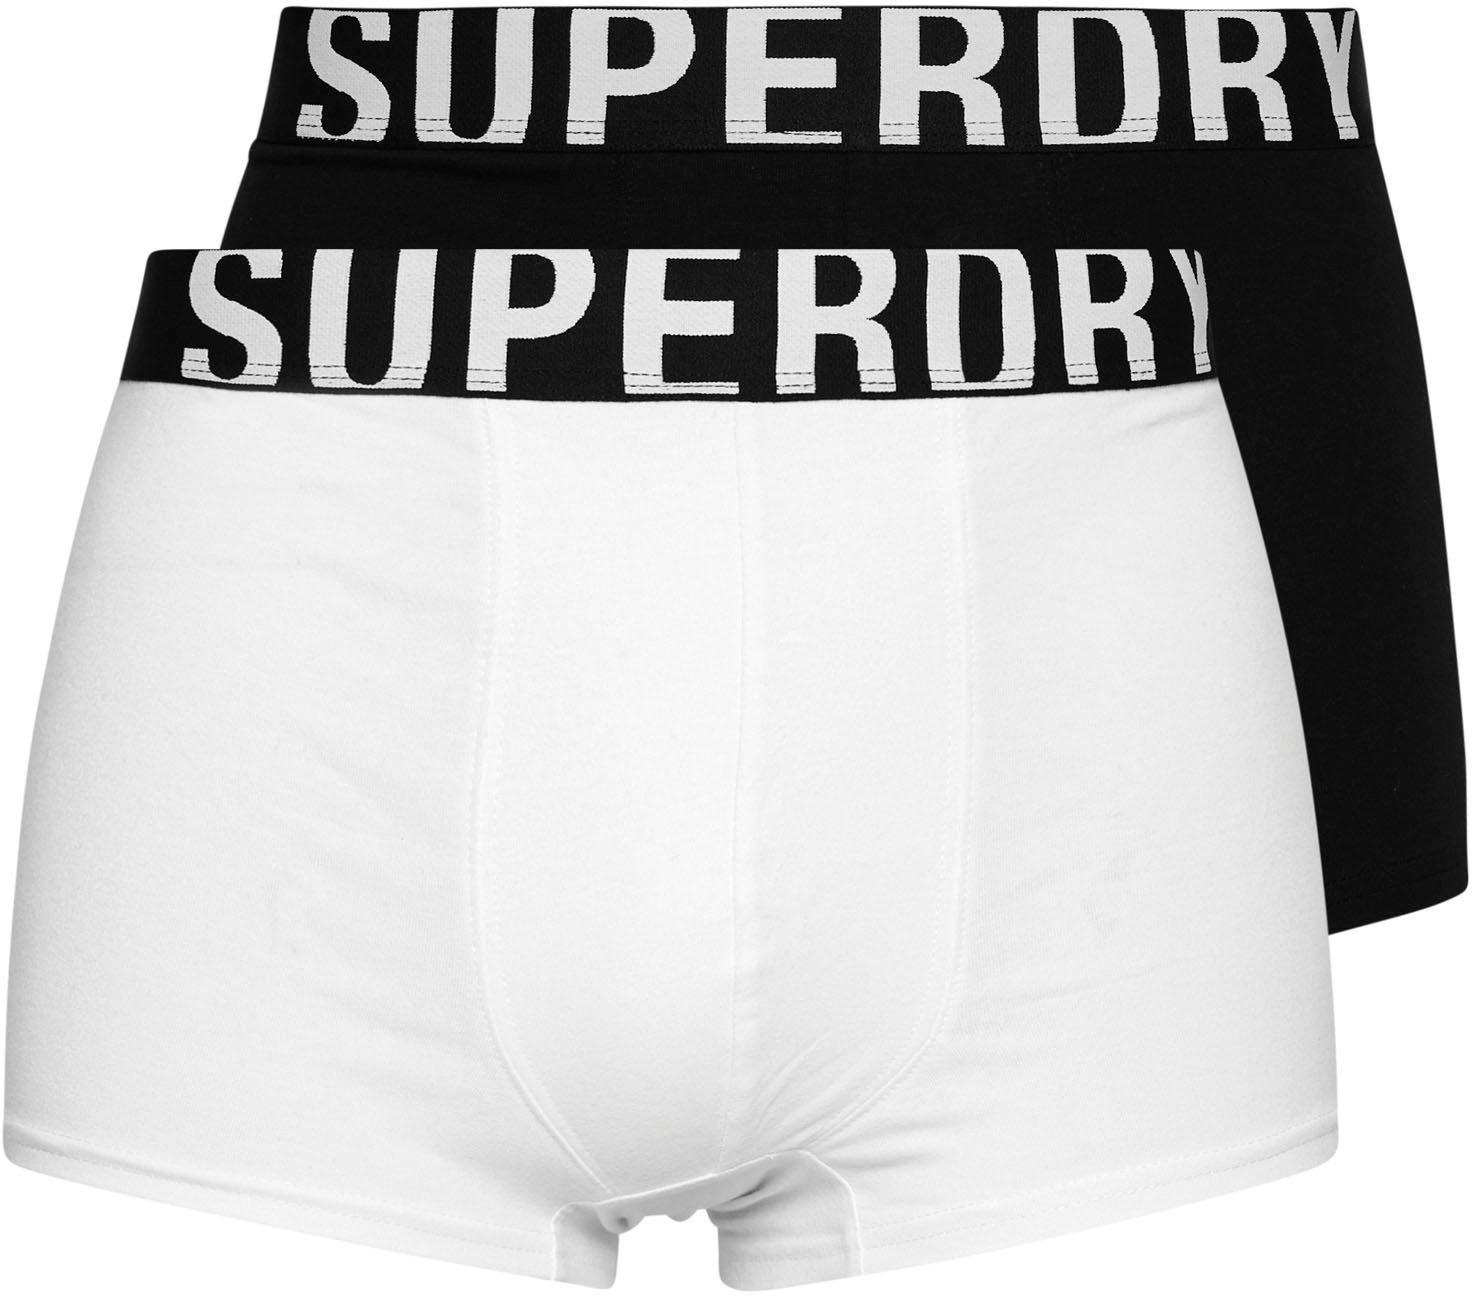 DUAL LOGO Boxer 2er-Pack) PACK Superdry schwarz, DOUBLE TRUNK (Packung, weiß